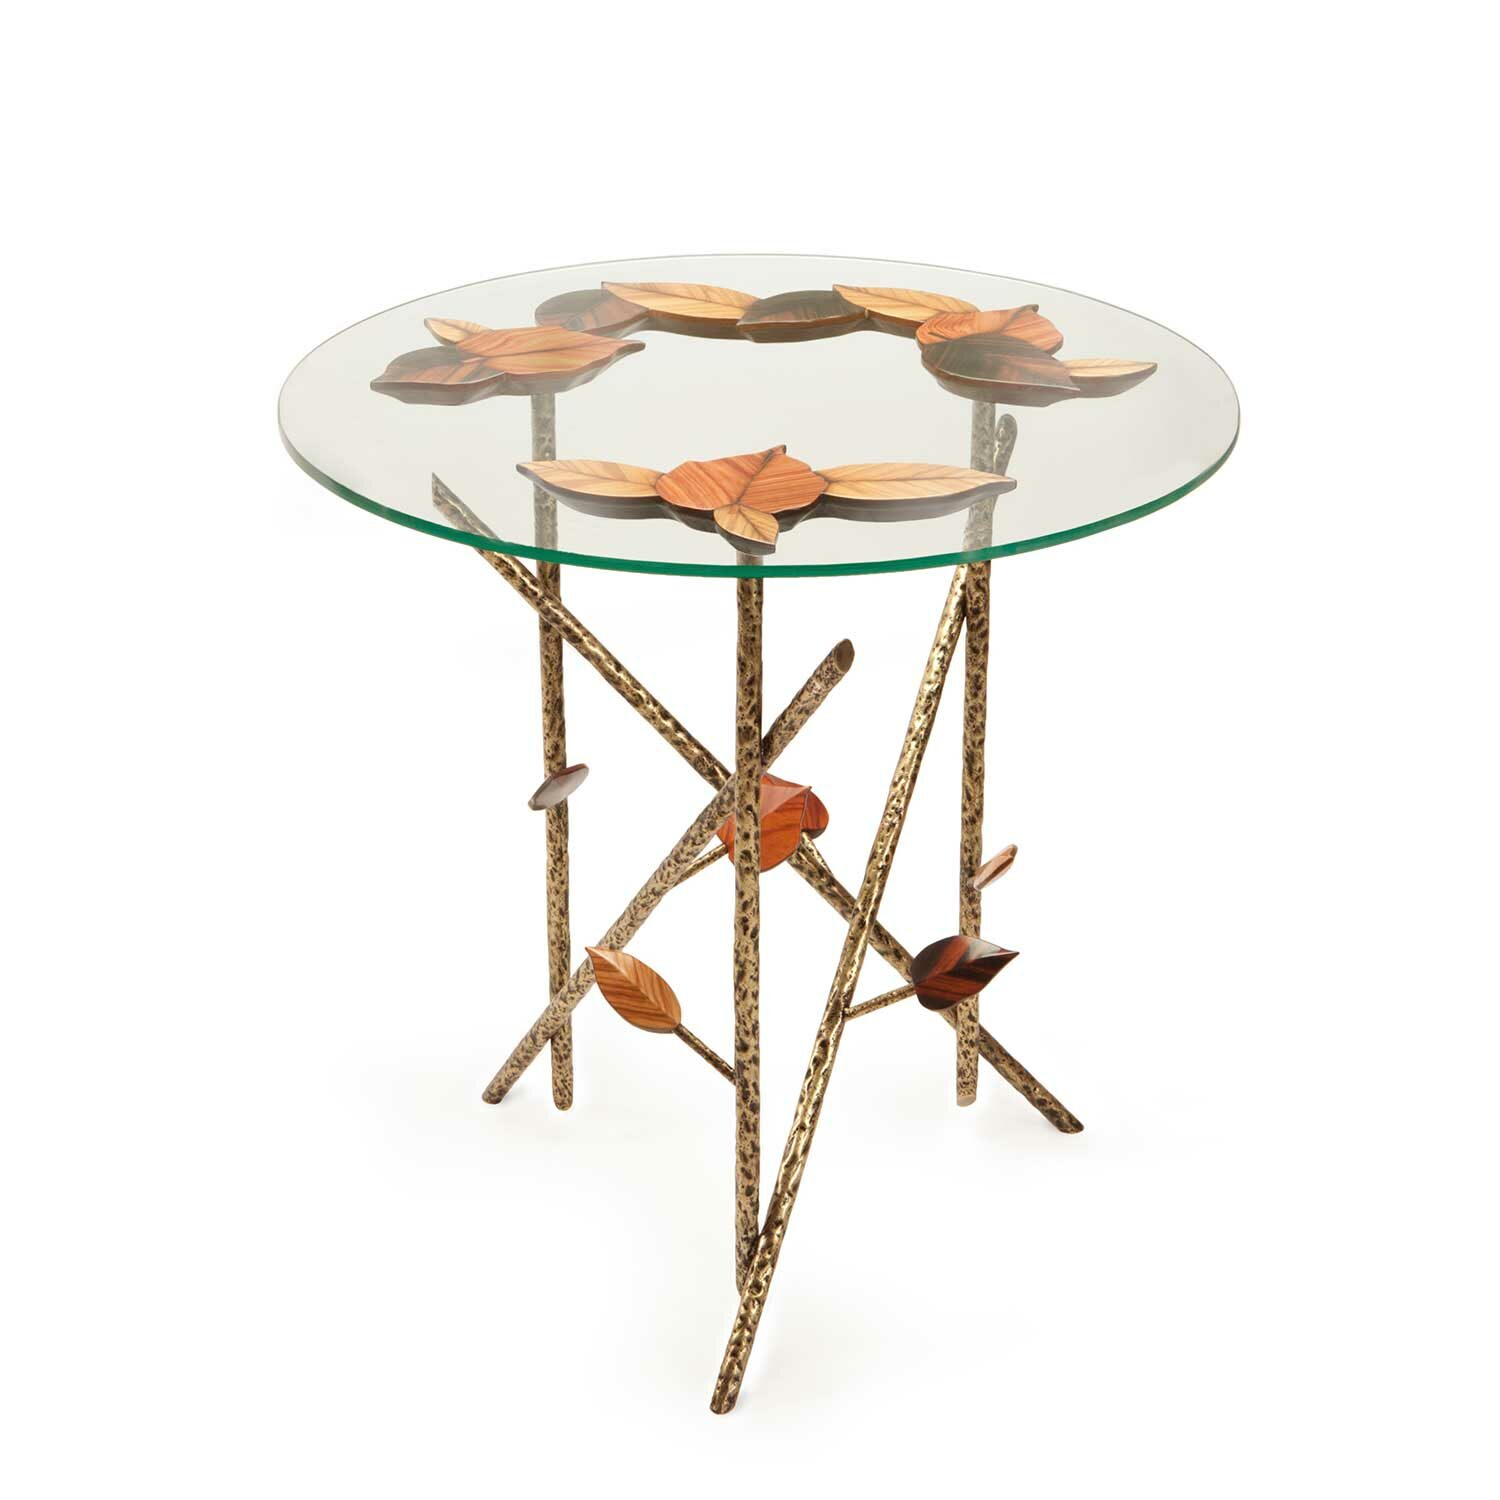 TREE BRANCHES side table